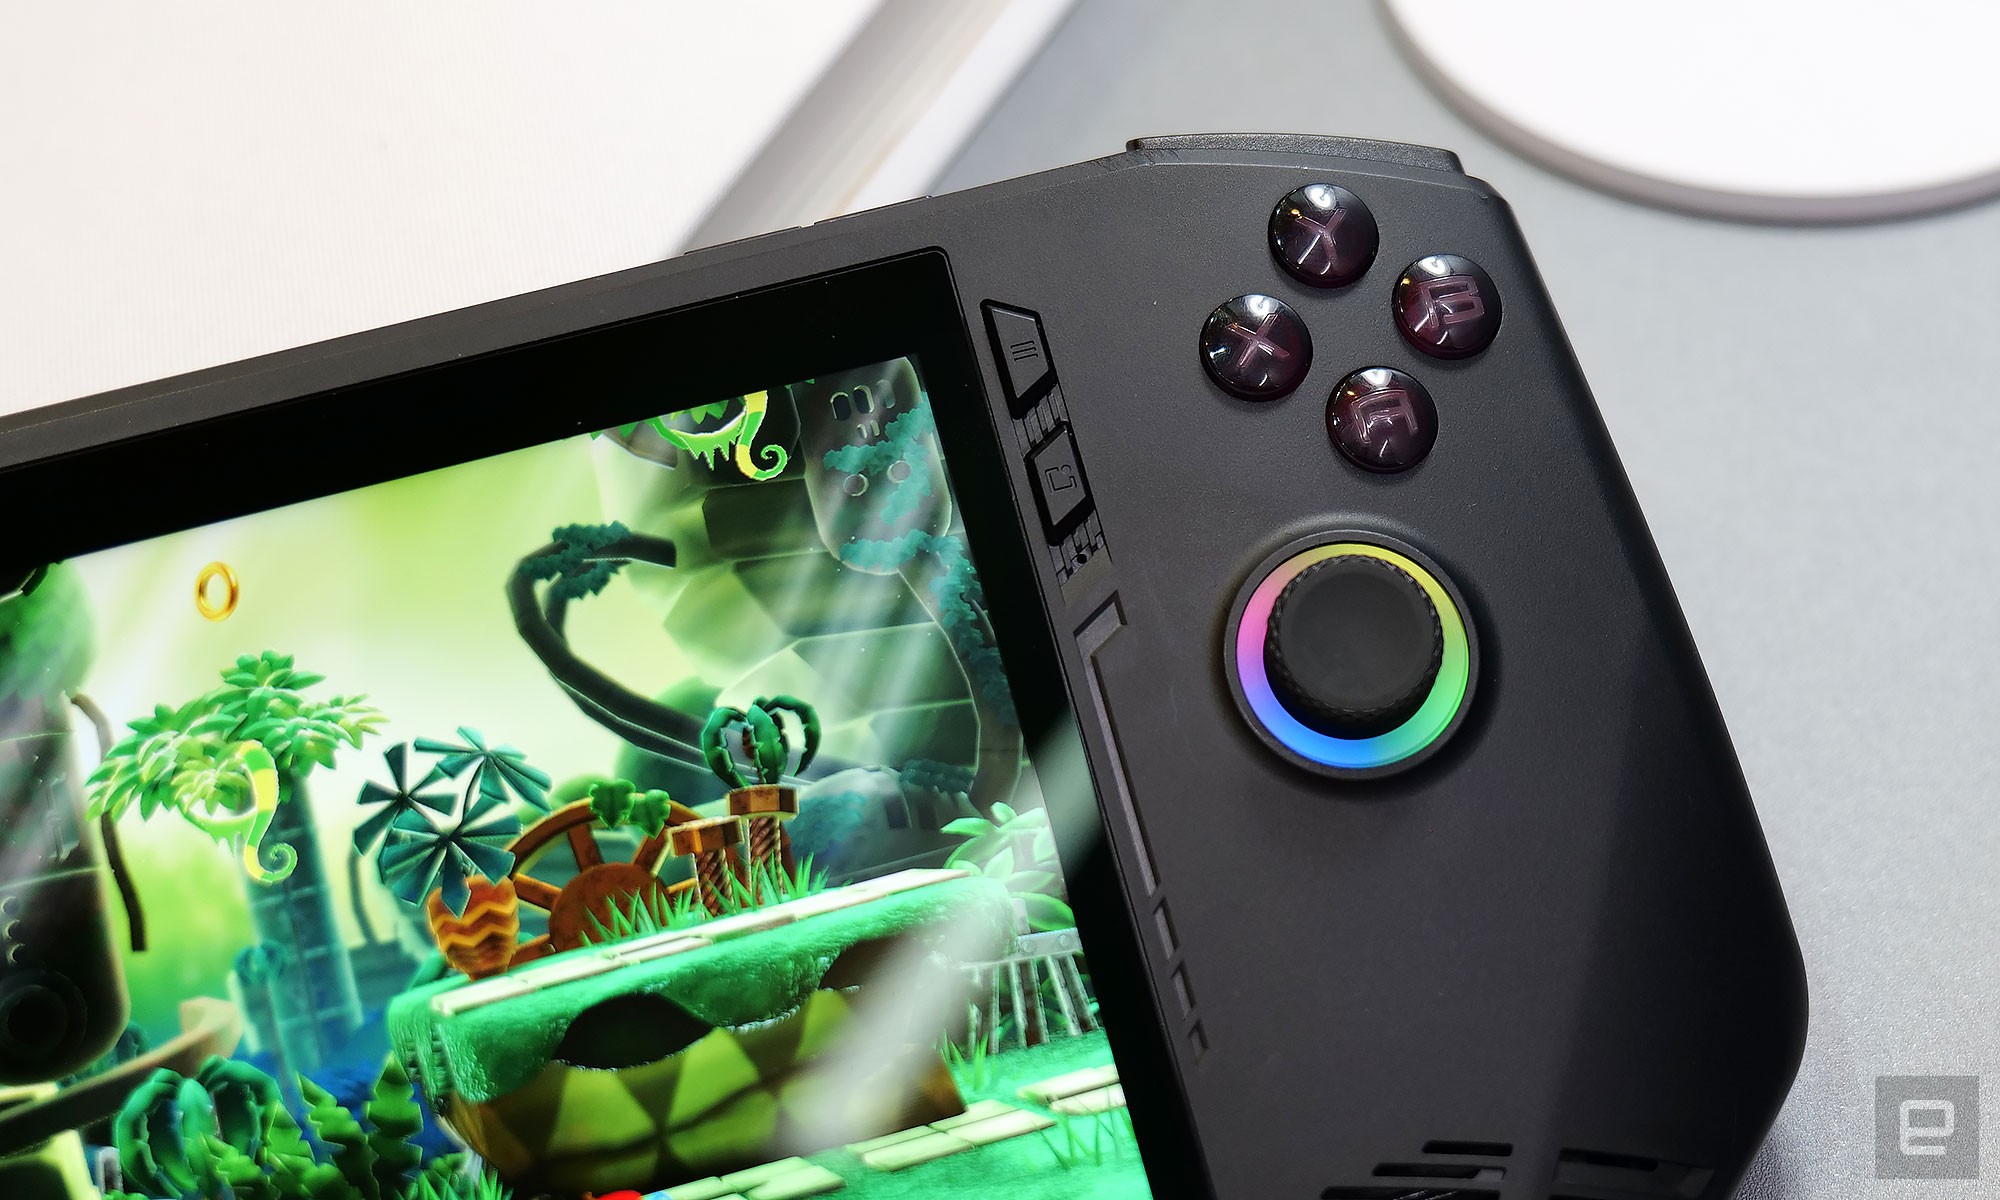 On top of RGB lighting, the Claw features hall effect sensors for both its buttons and joysticks.